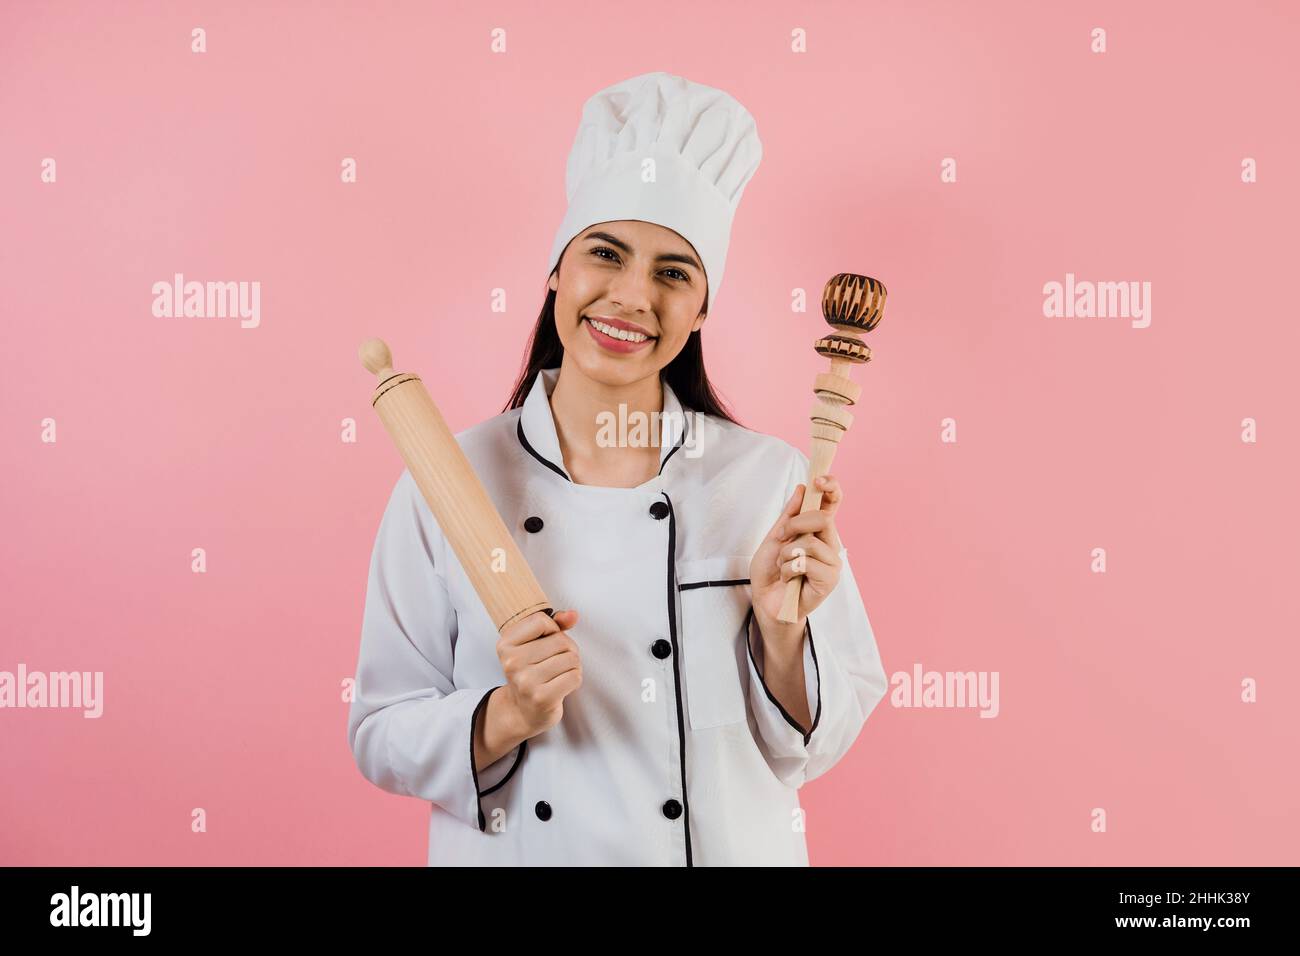 Portrait of young latin woman chef on a pink background in latin america Stock Photo